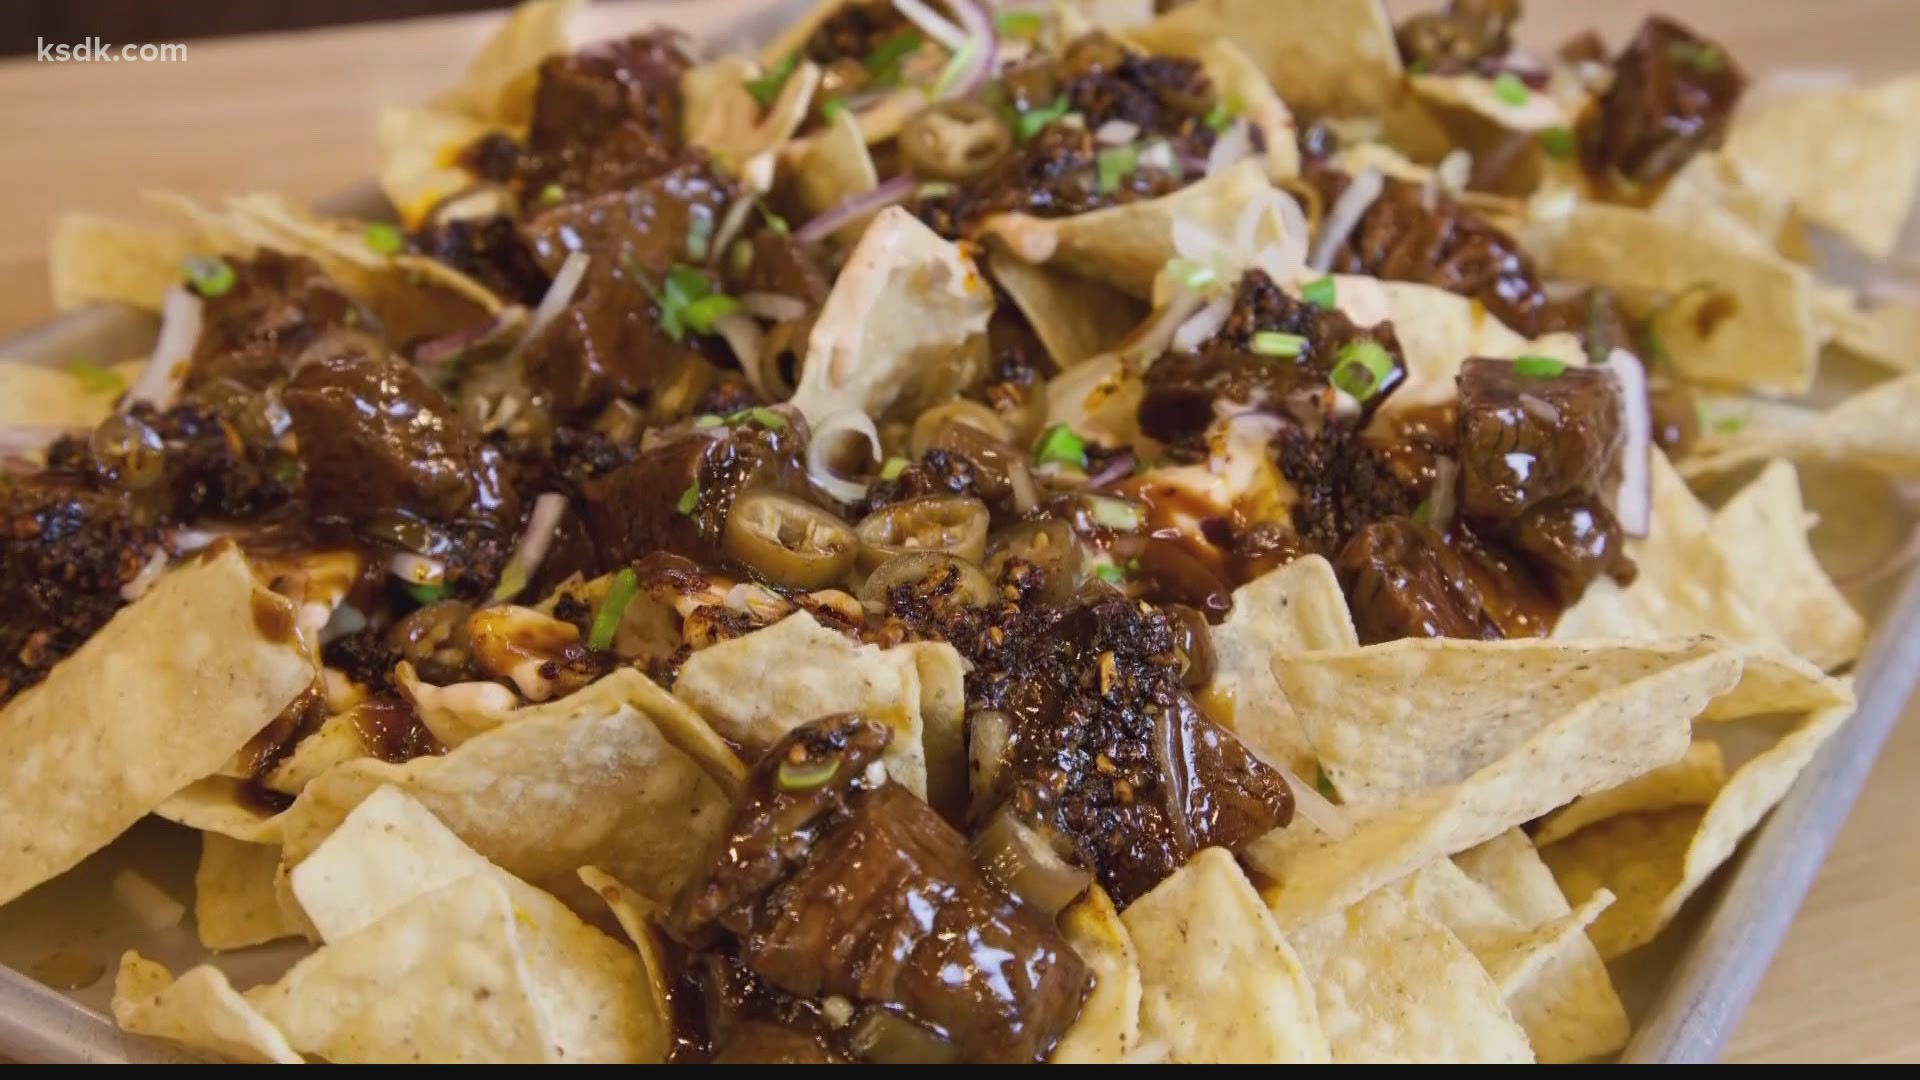 Nudo House has put together a special menu of wings, nachos, and other Super Bowl fare.